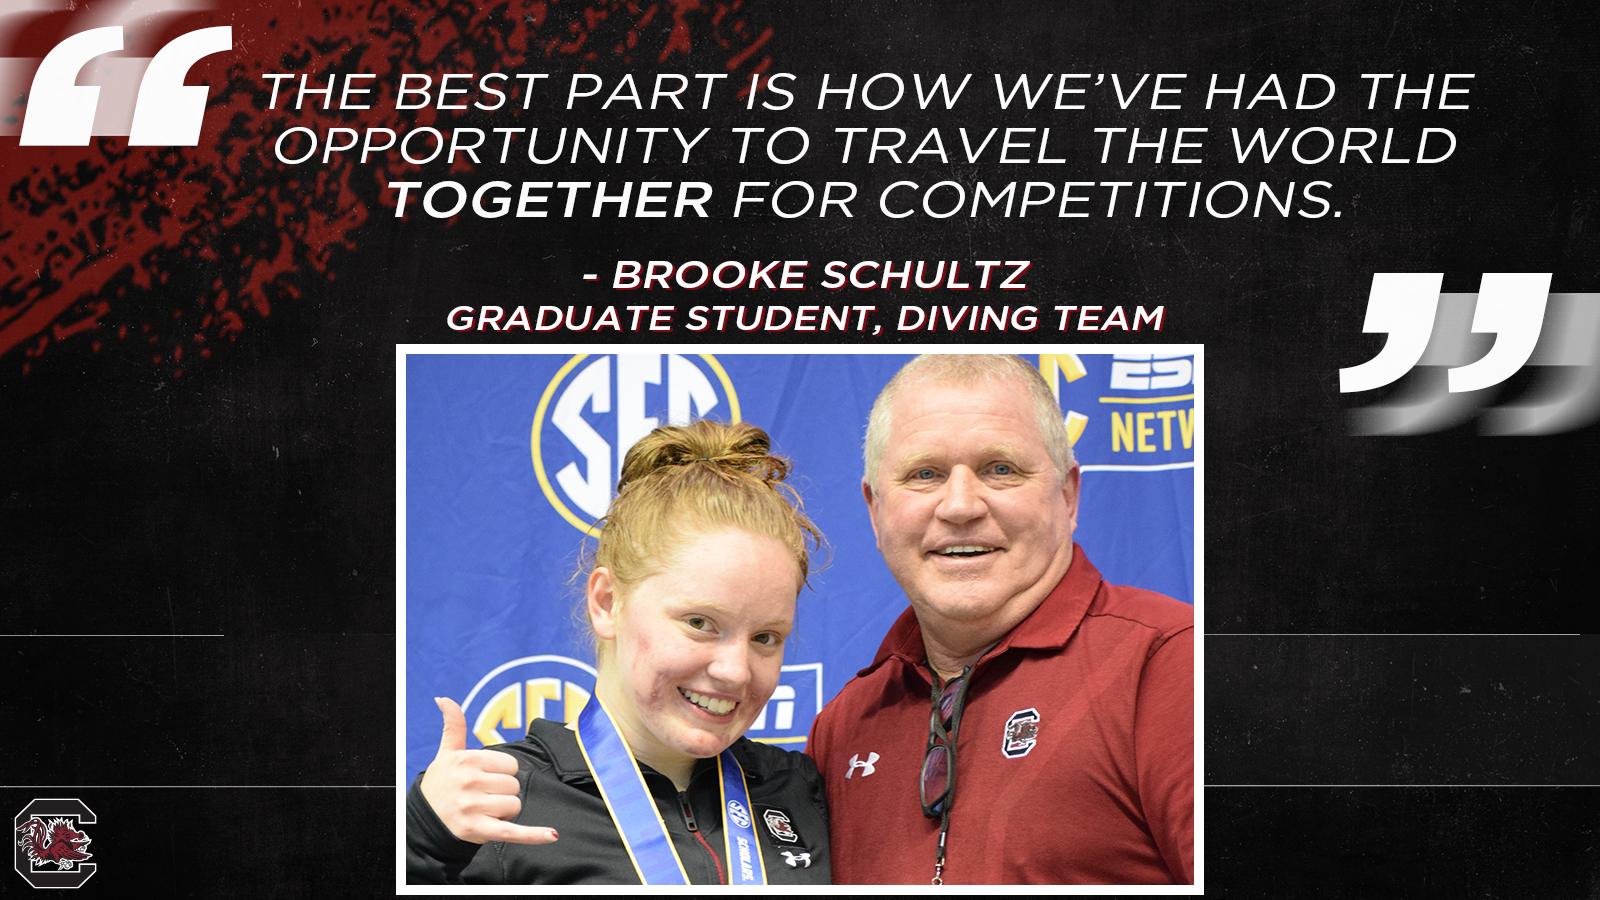 It's All in the Family for Gamecock Diver and Coach